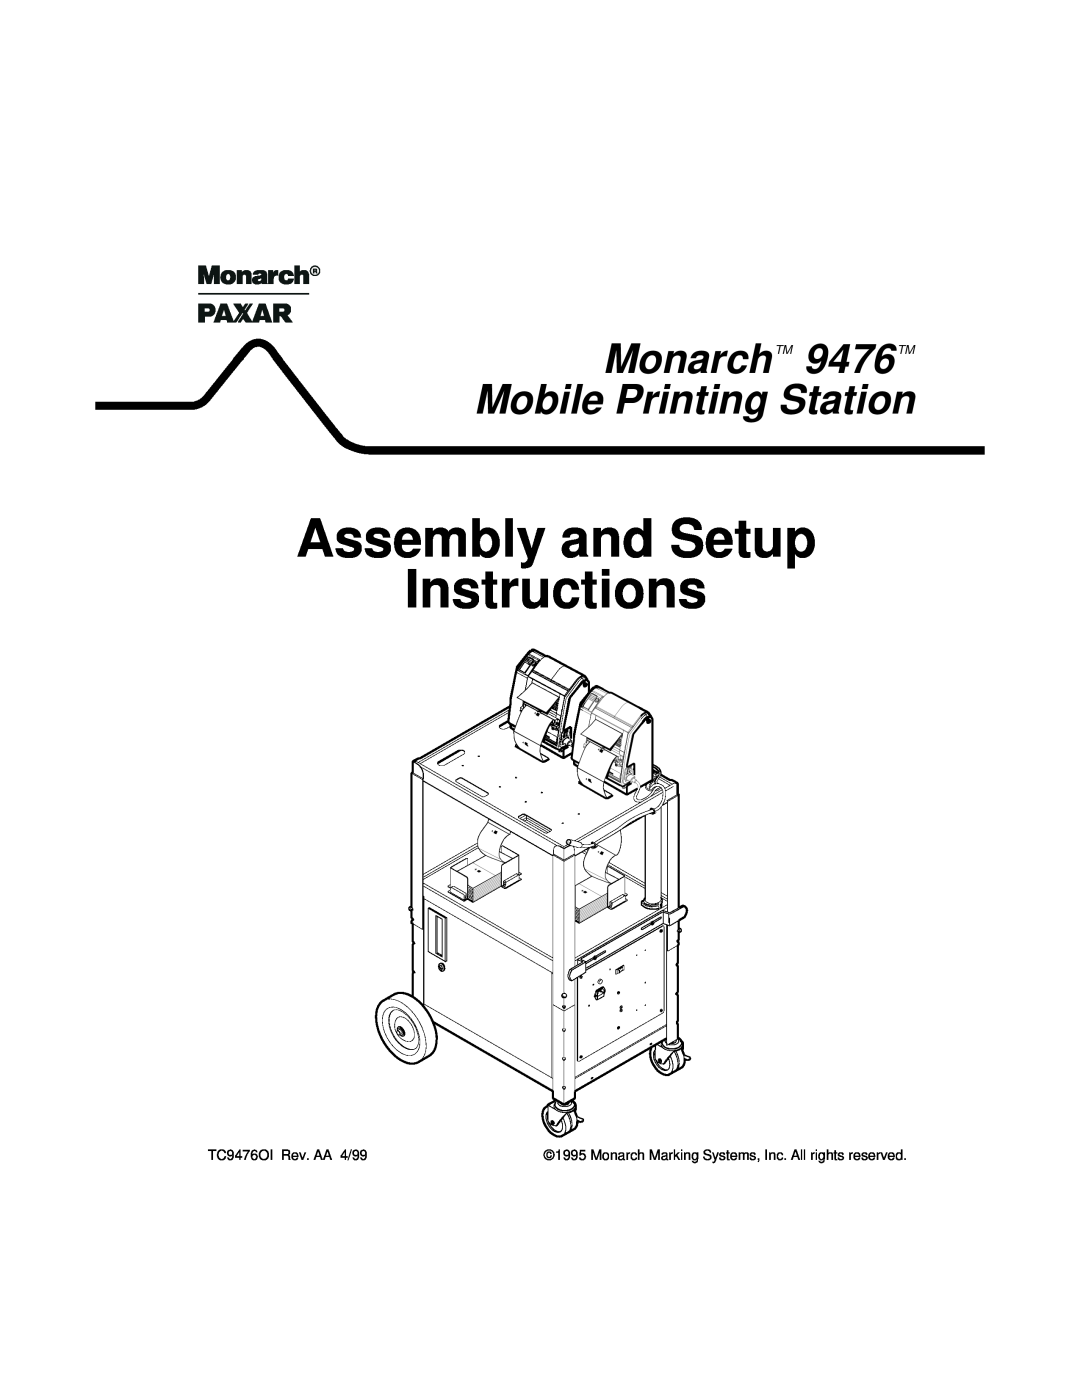 Paxar Monarch 9476 manual Assembly and Setup Instructions, MonarchTM 9476TM Mobile Printing Station, TC9476OI Rev. AA 4/99 